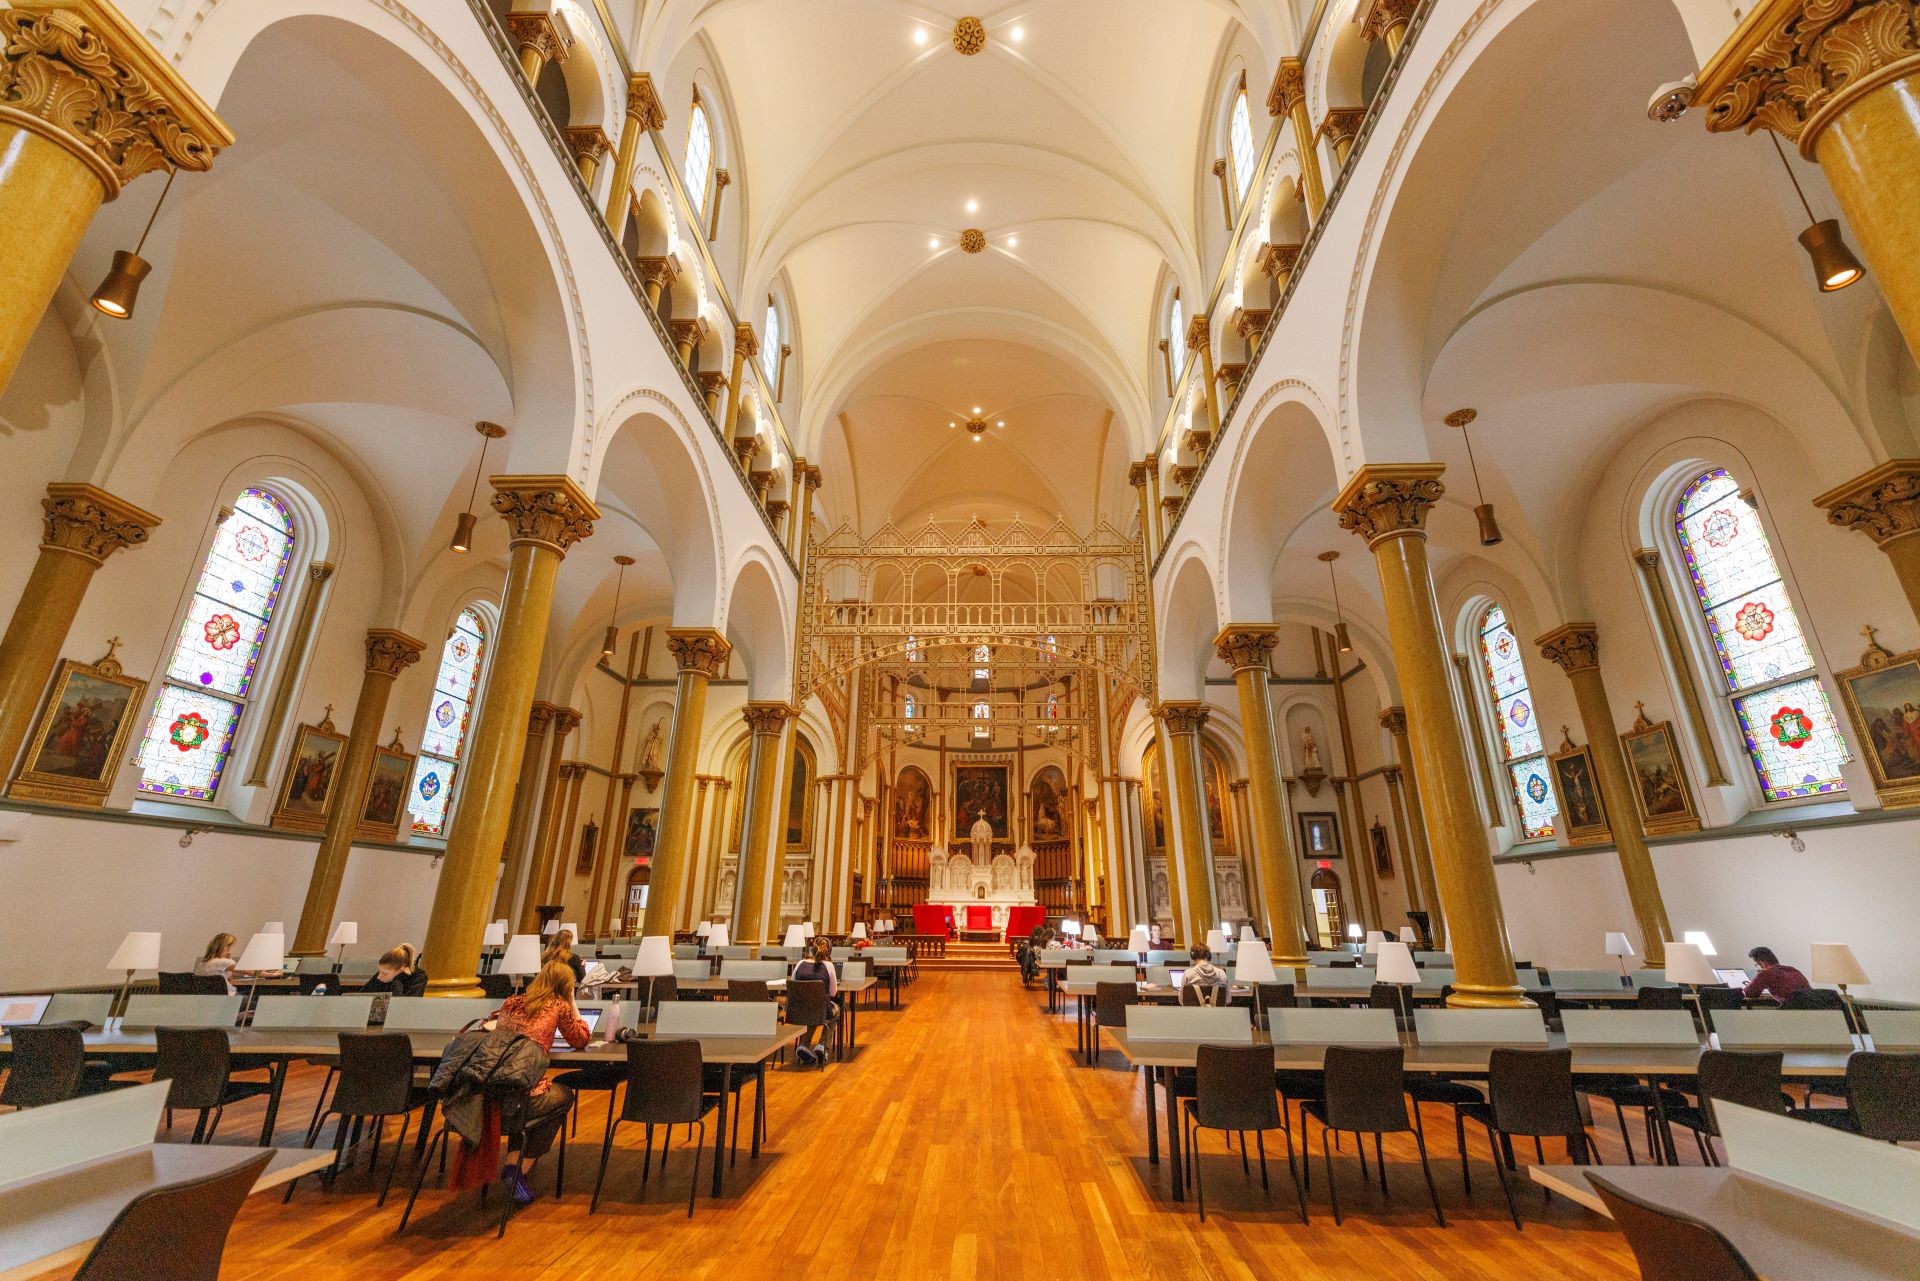 A converted chapel now serving as a reading room, with modern furniture set among traditional church architecture.